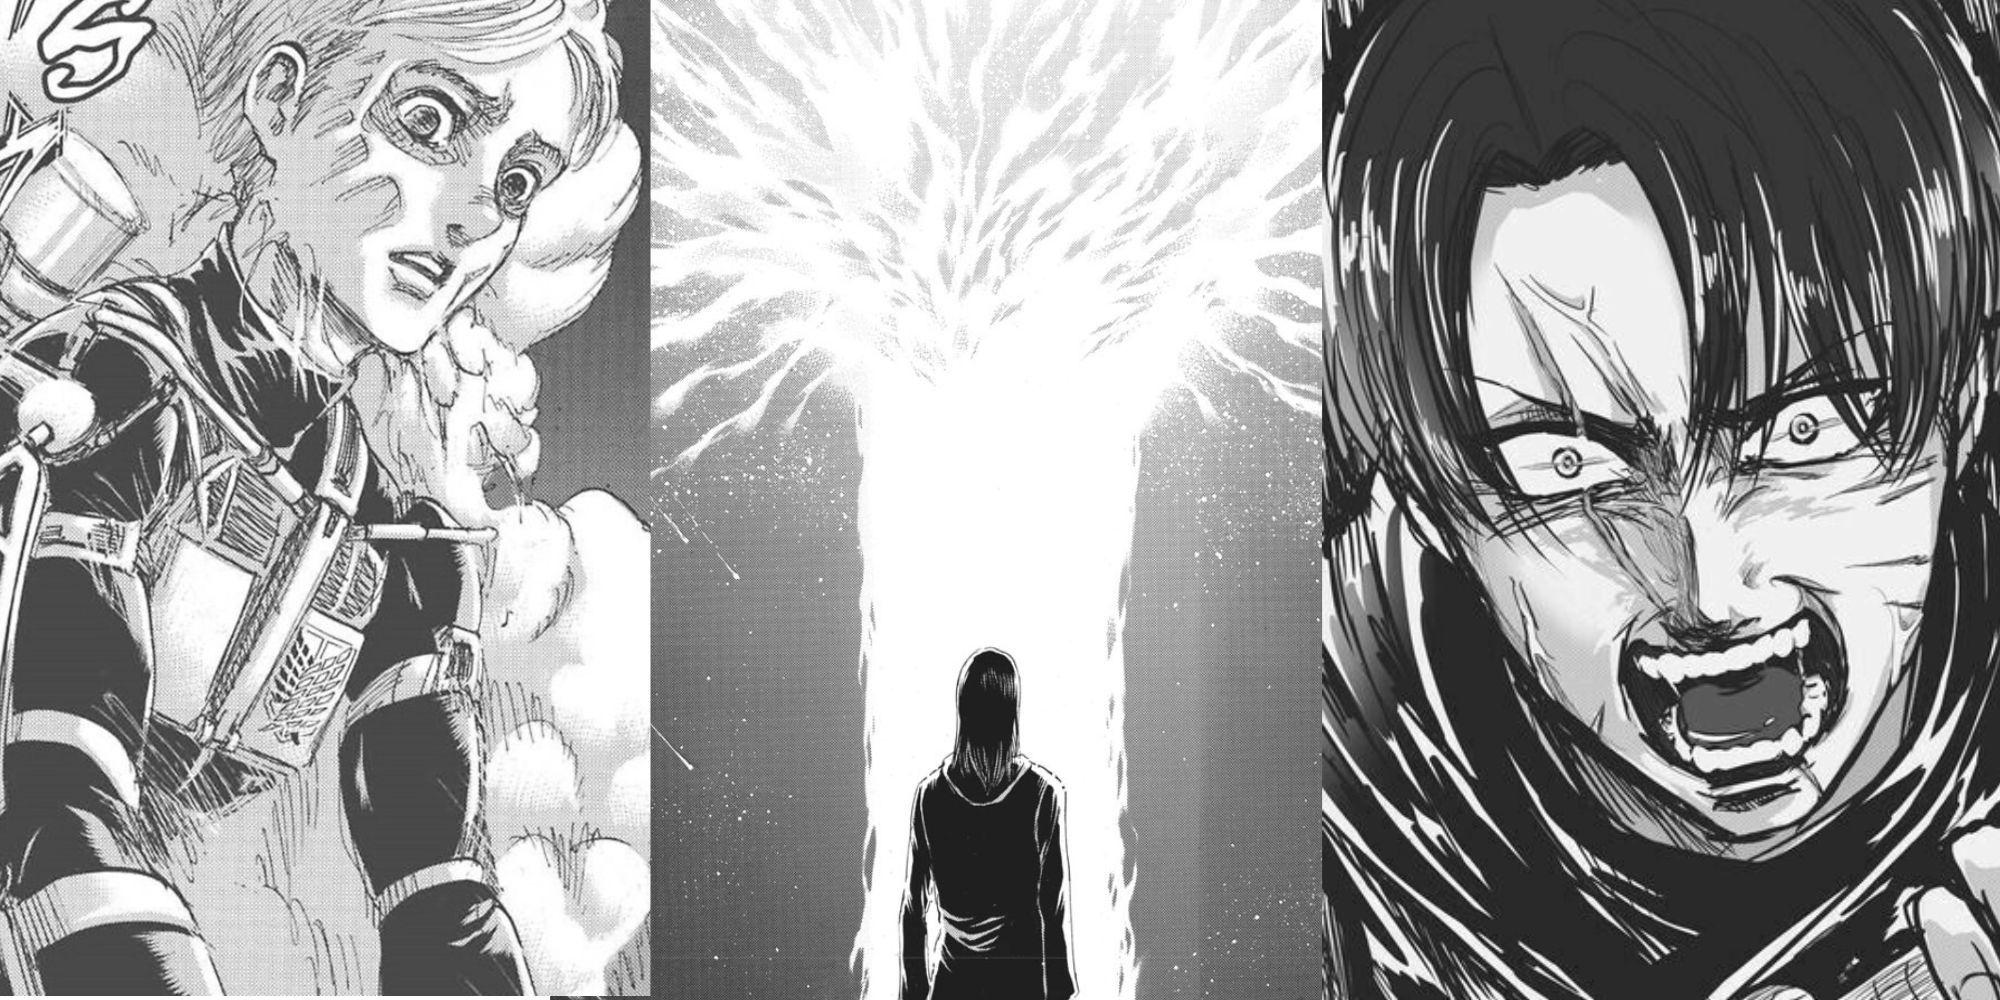 The 10 Best Manga Volumes Of Attack On Titan (According To Goodreads)